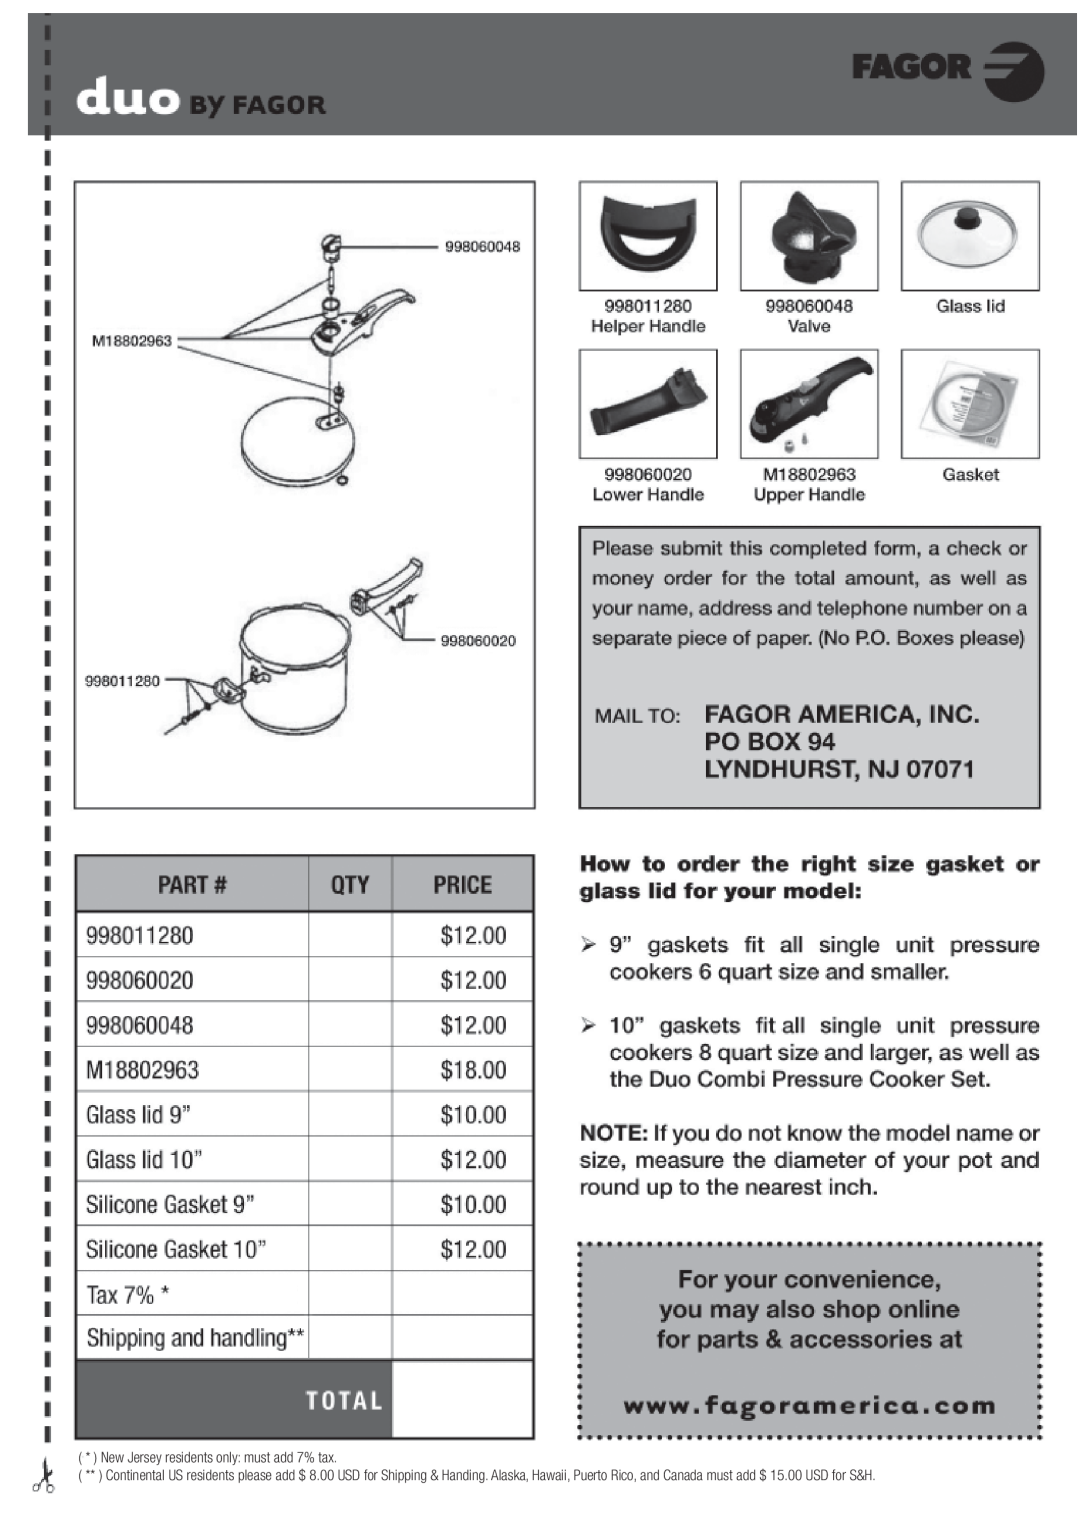 Fagor America fagor duo pressure cooker user manual New Jersey residents only: must add 7% tax 